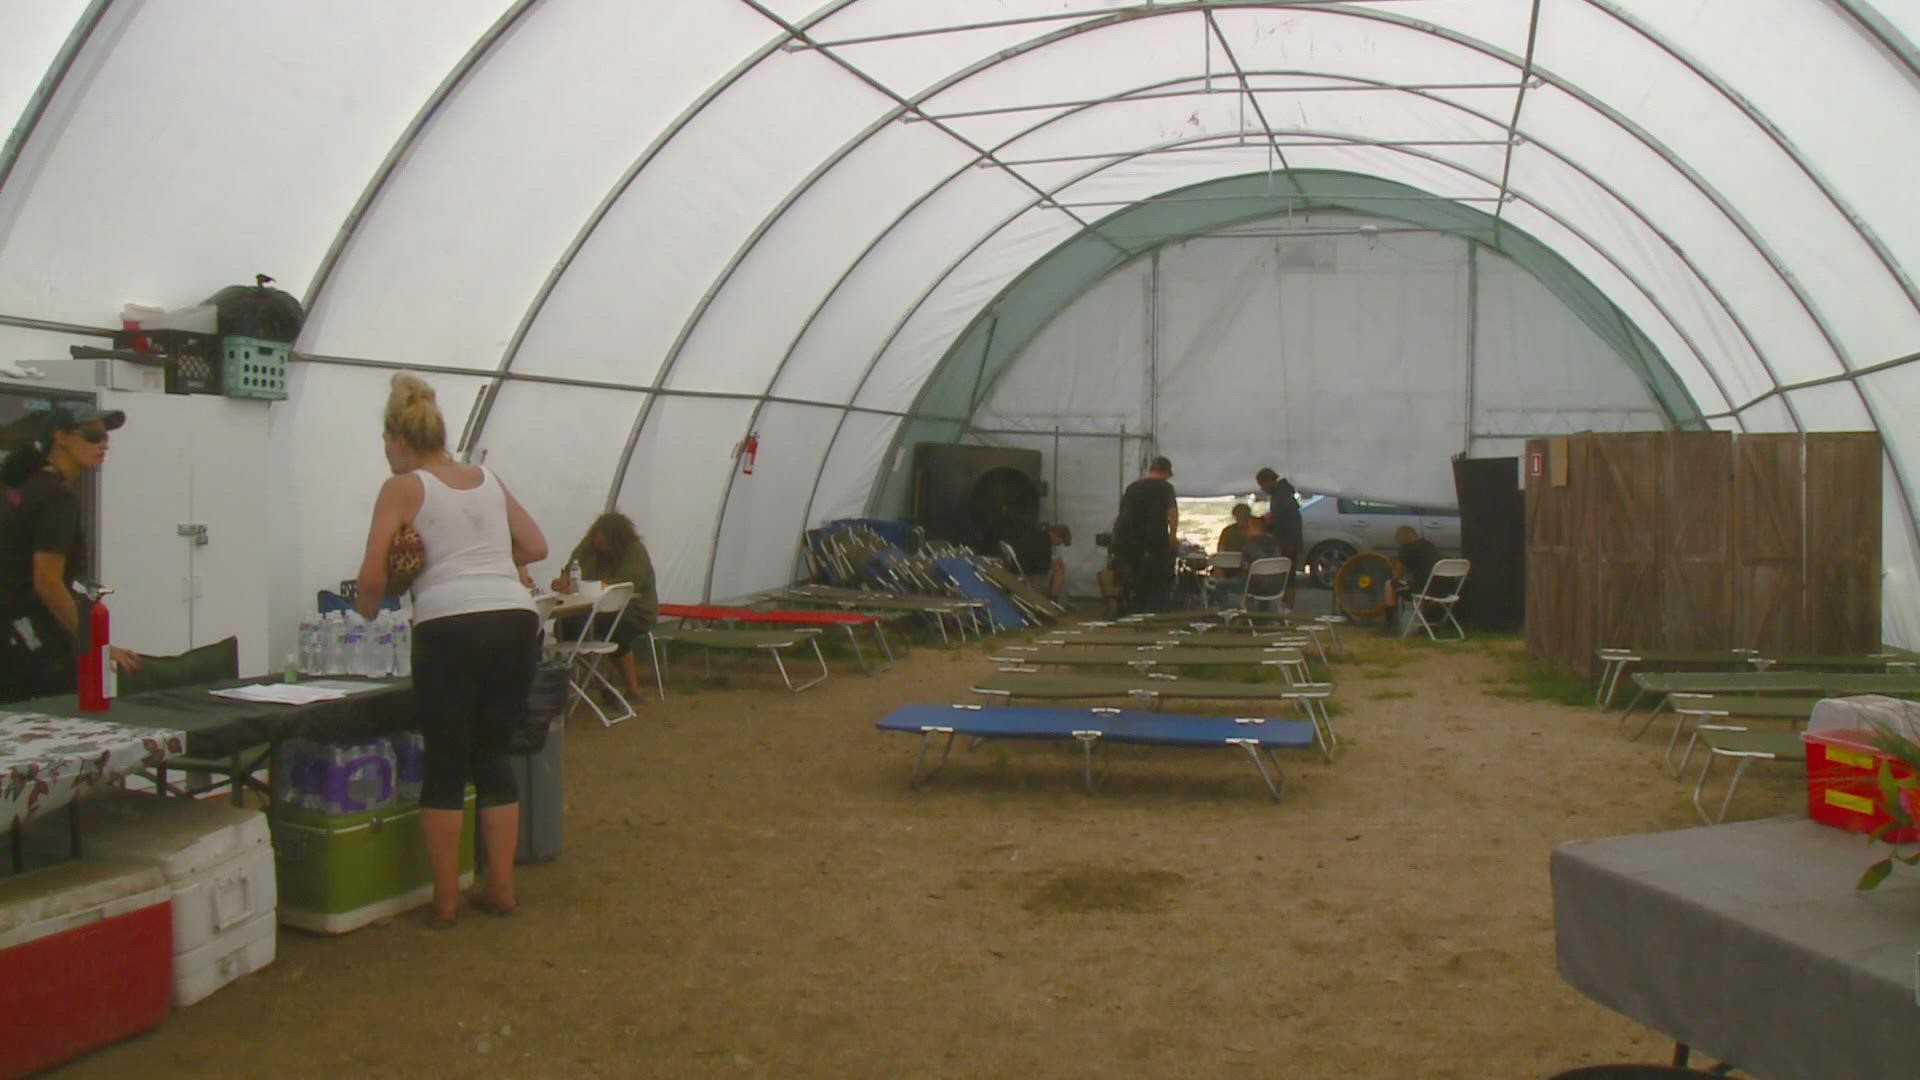 The cooling tent was meant to go down a few weeks ago, but it still remains up. Now, the city is asking Jewel's Helping Hands to take it down, once more.